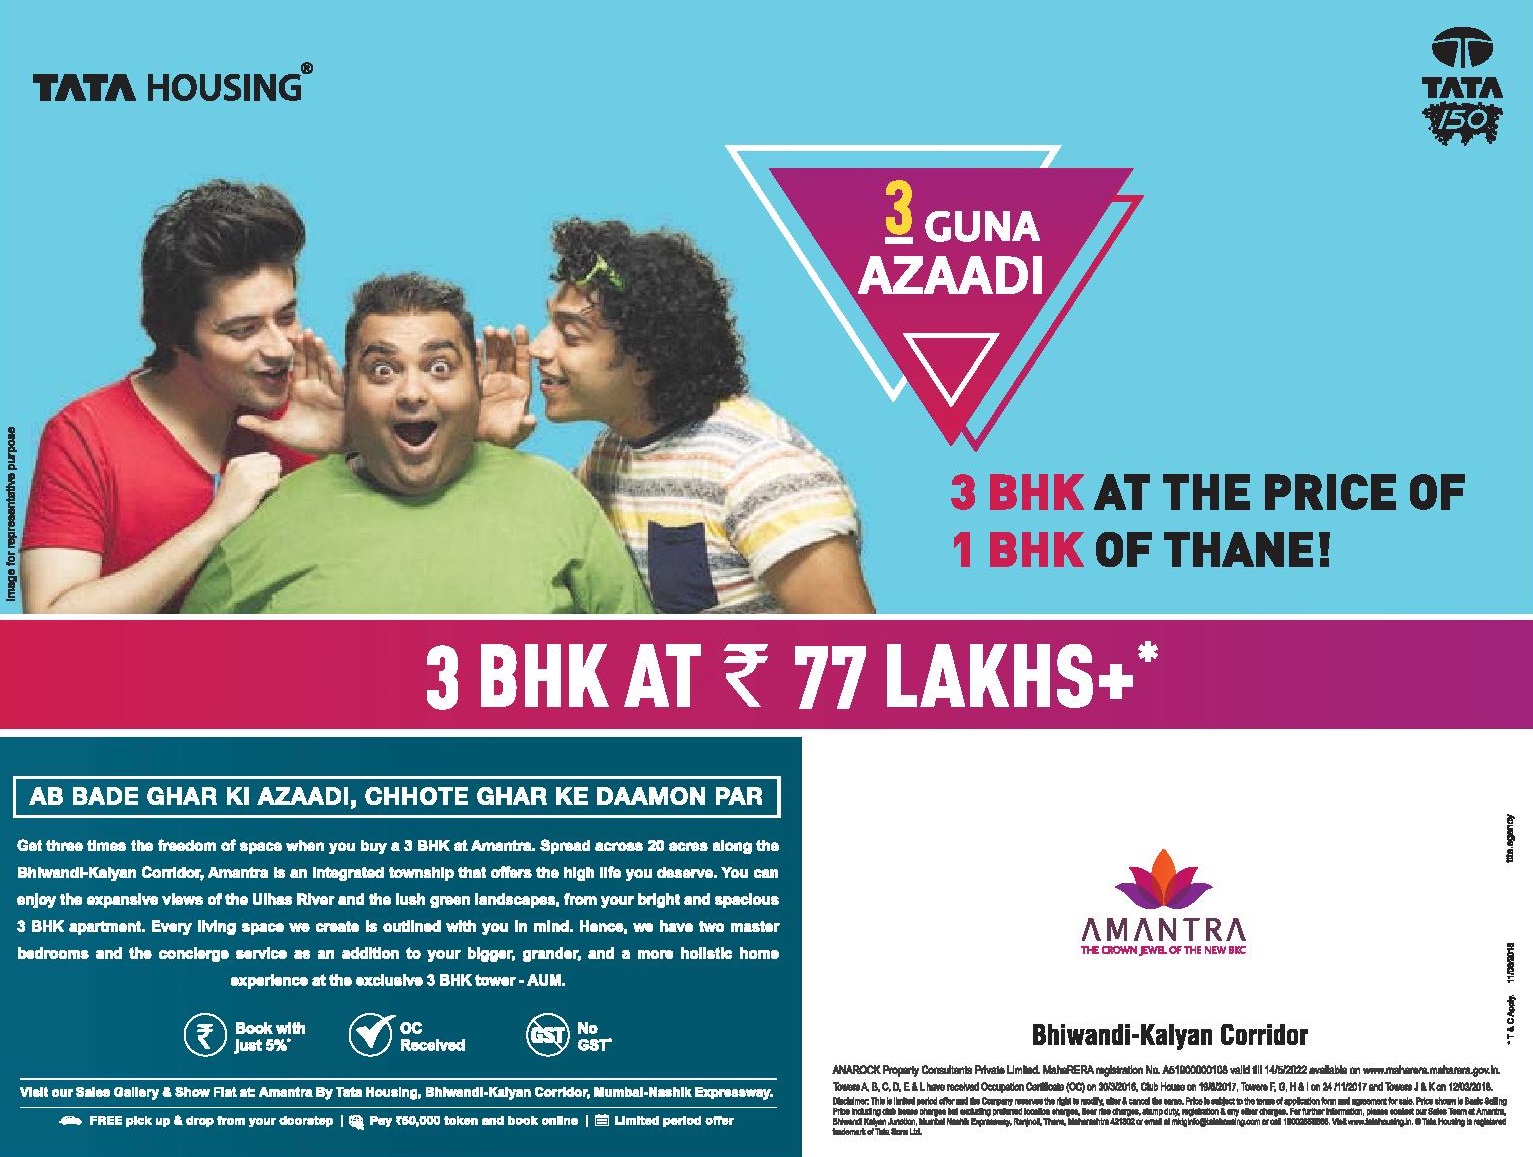 Just pay 5% & book your home at Tata Amantra in Mumbai Update